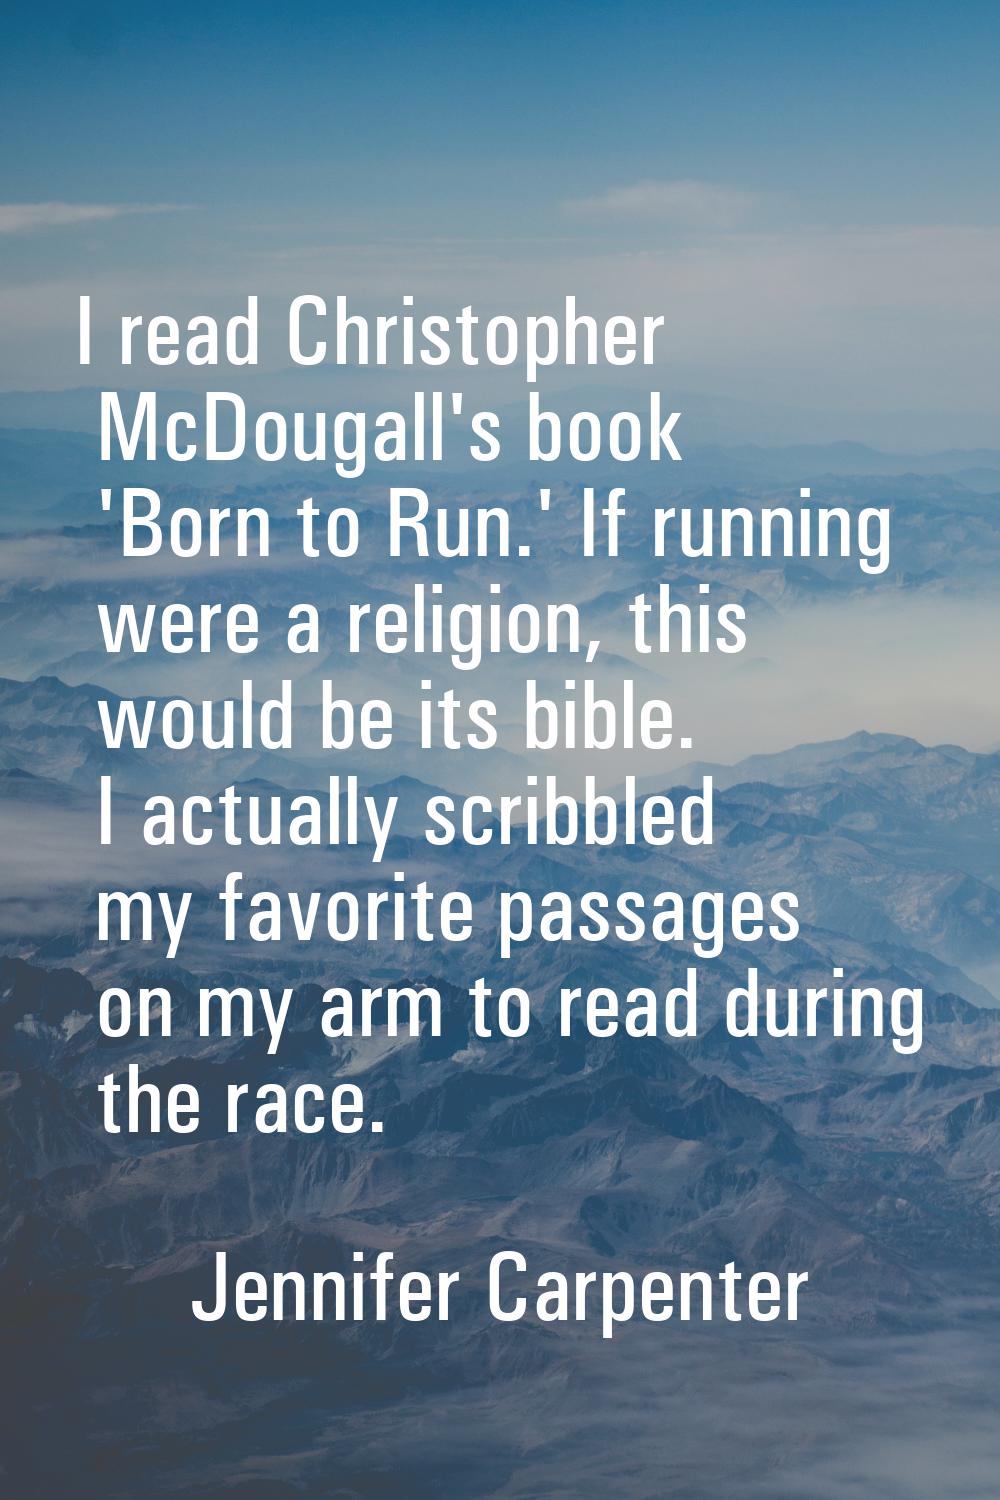 I read Christopher McDougall's book 'Born to Run.' If running were a religion, this would be its bi